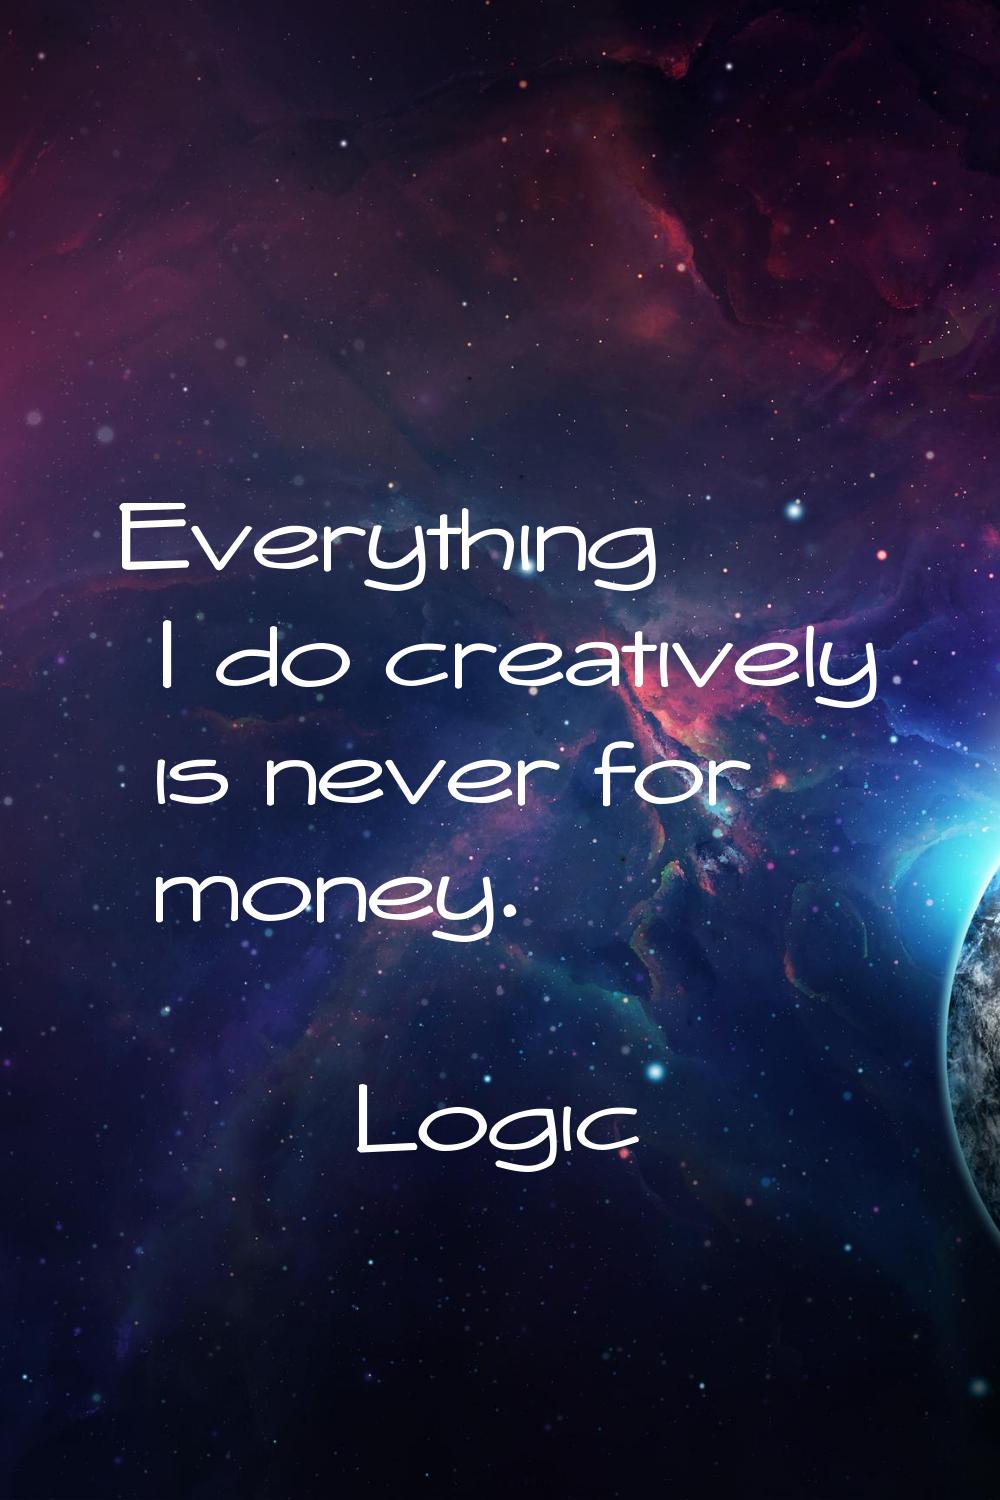 Everything I do creatively is never for money.